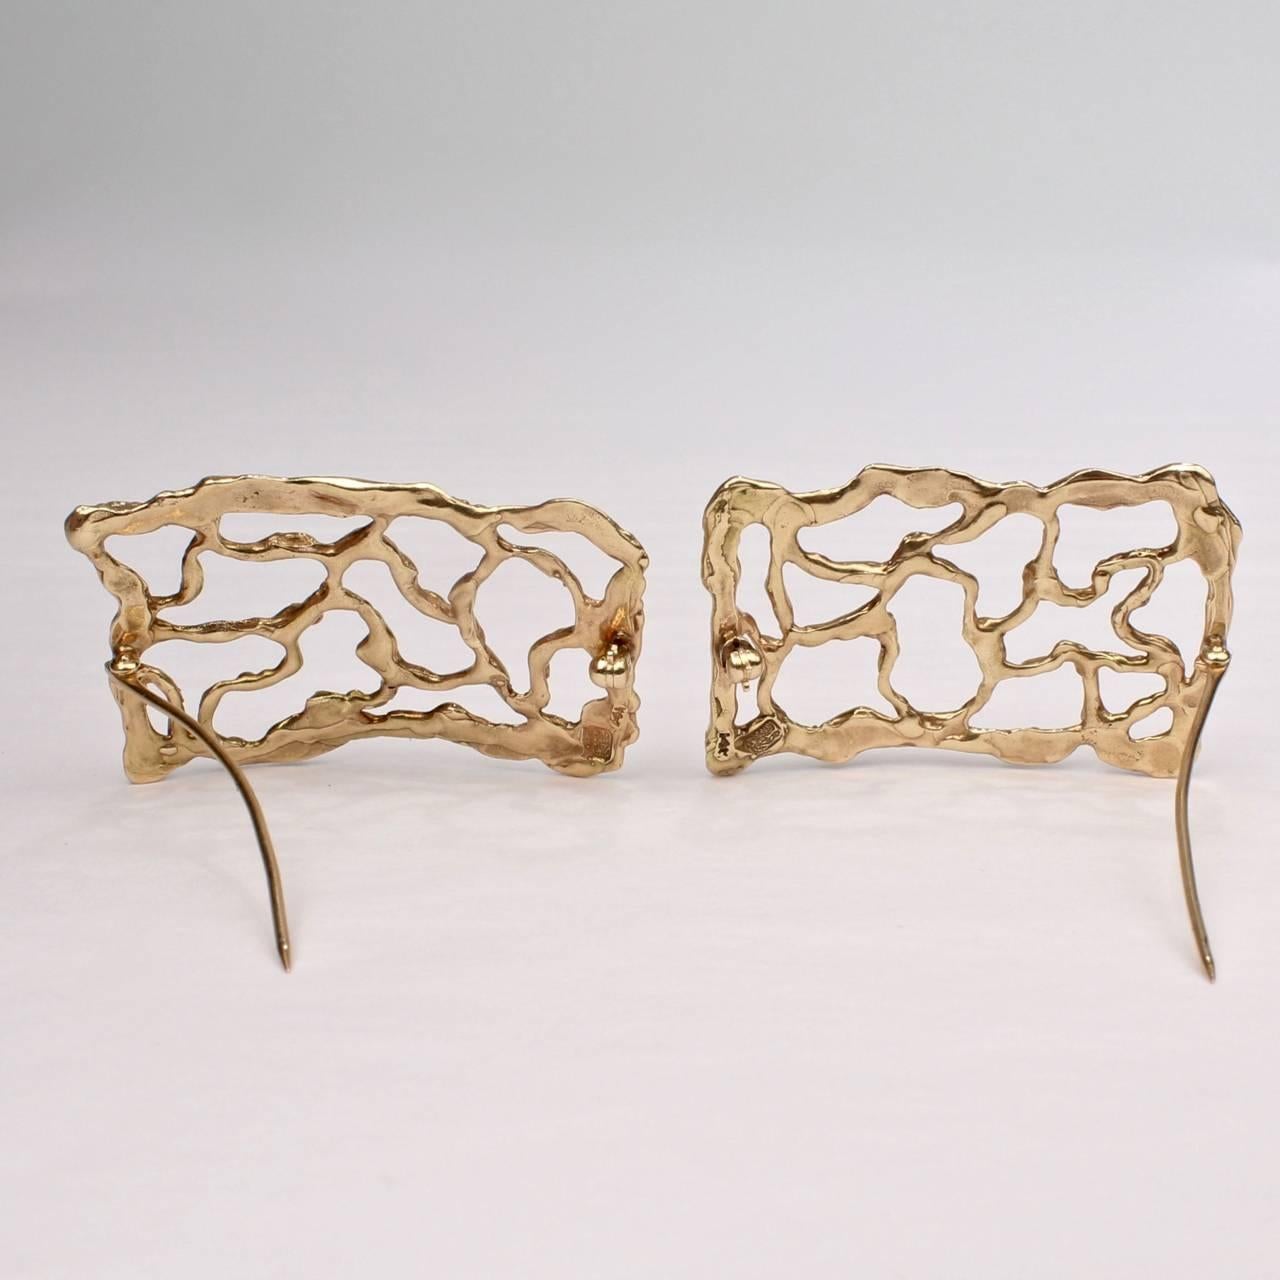 20th Century Pair of Artist Signed 14-Karat Gold Brutalist Brooches or Pins